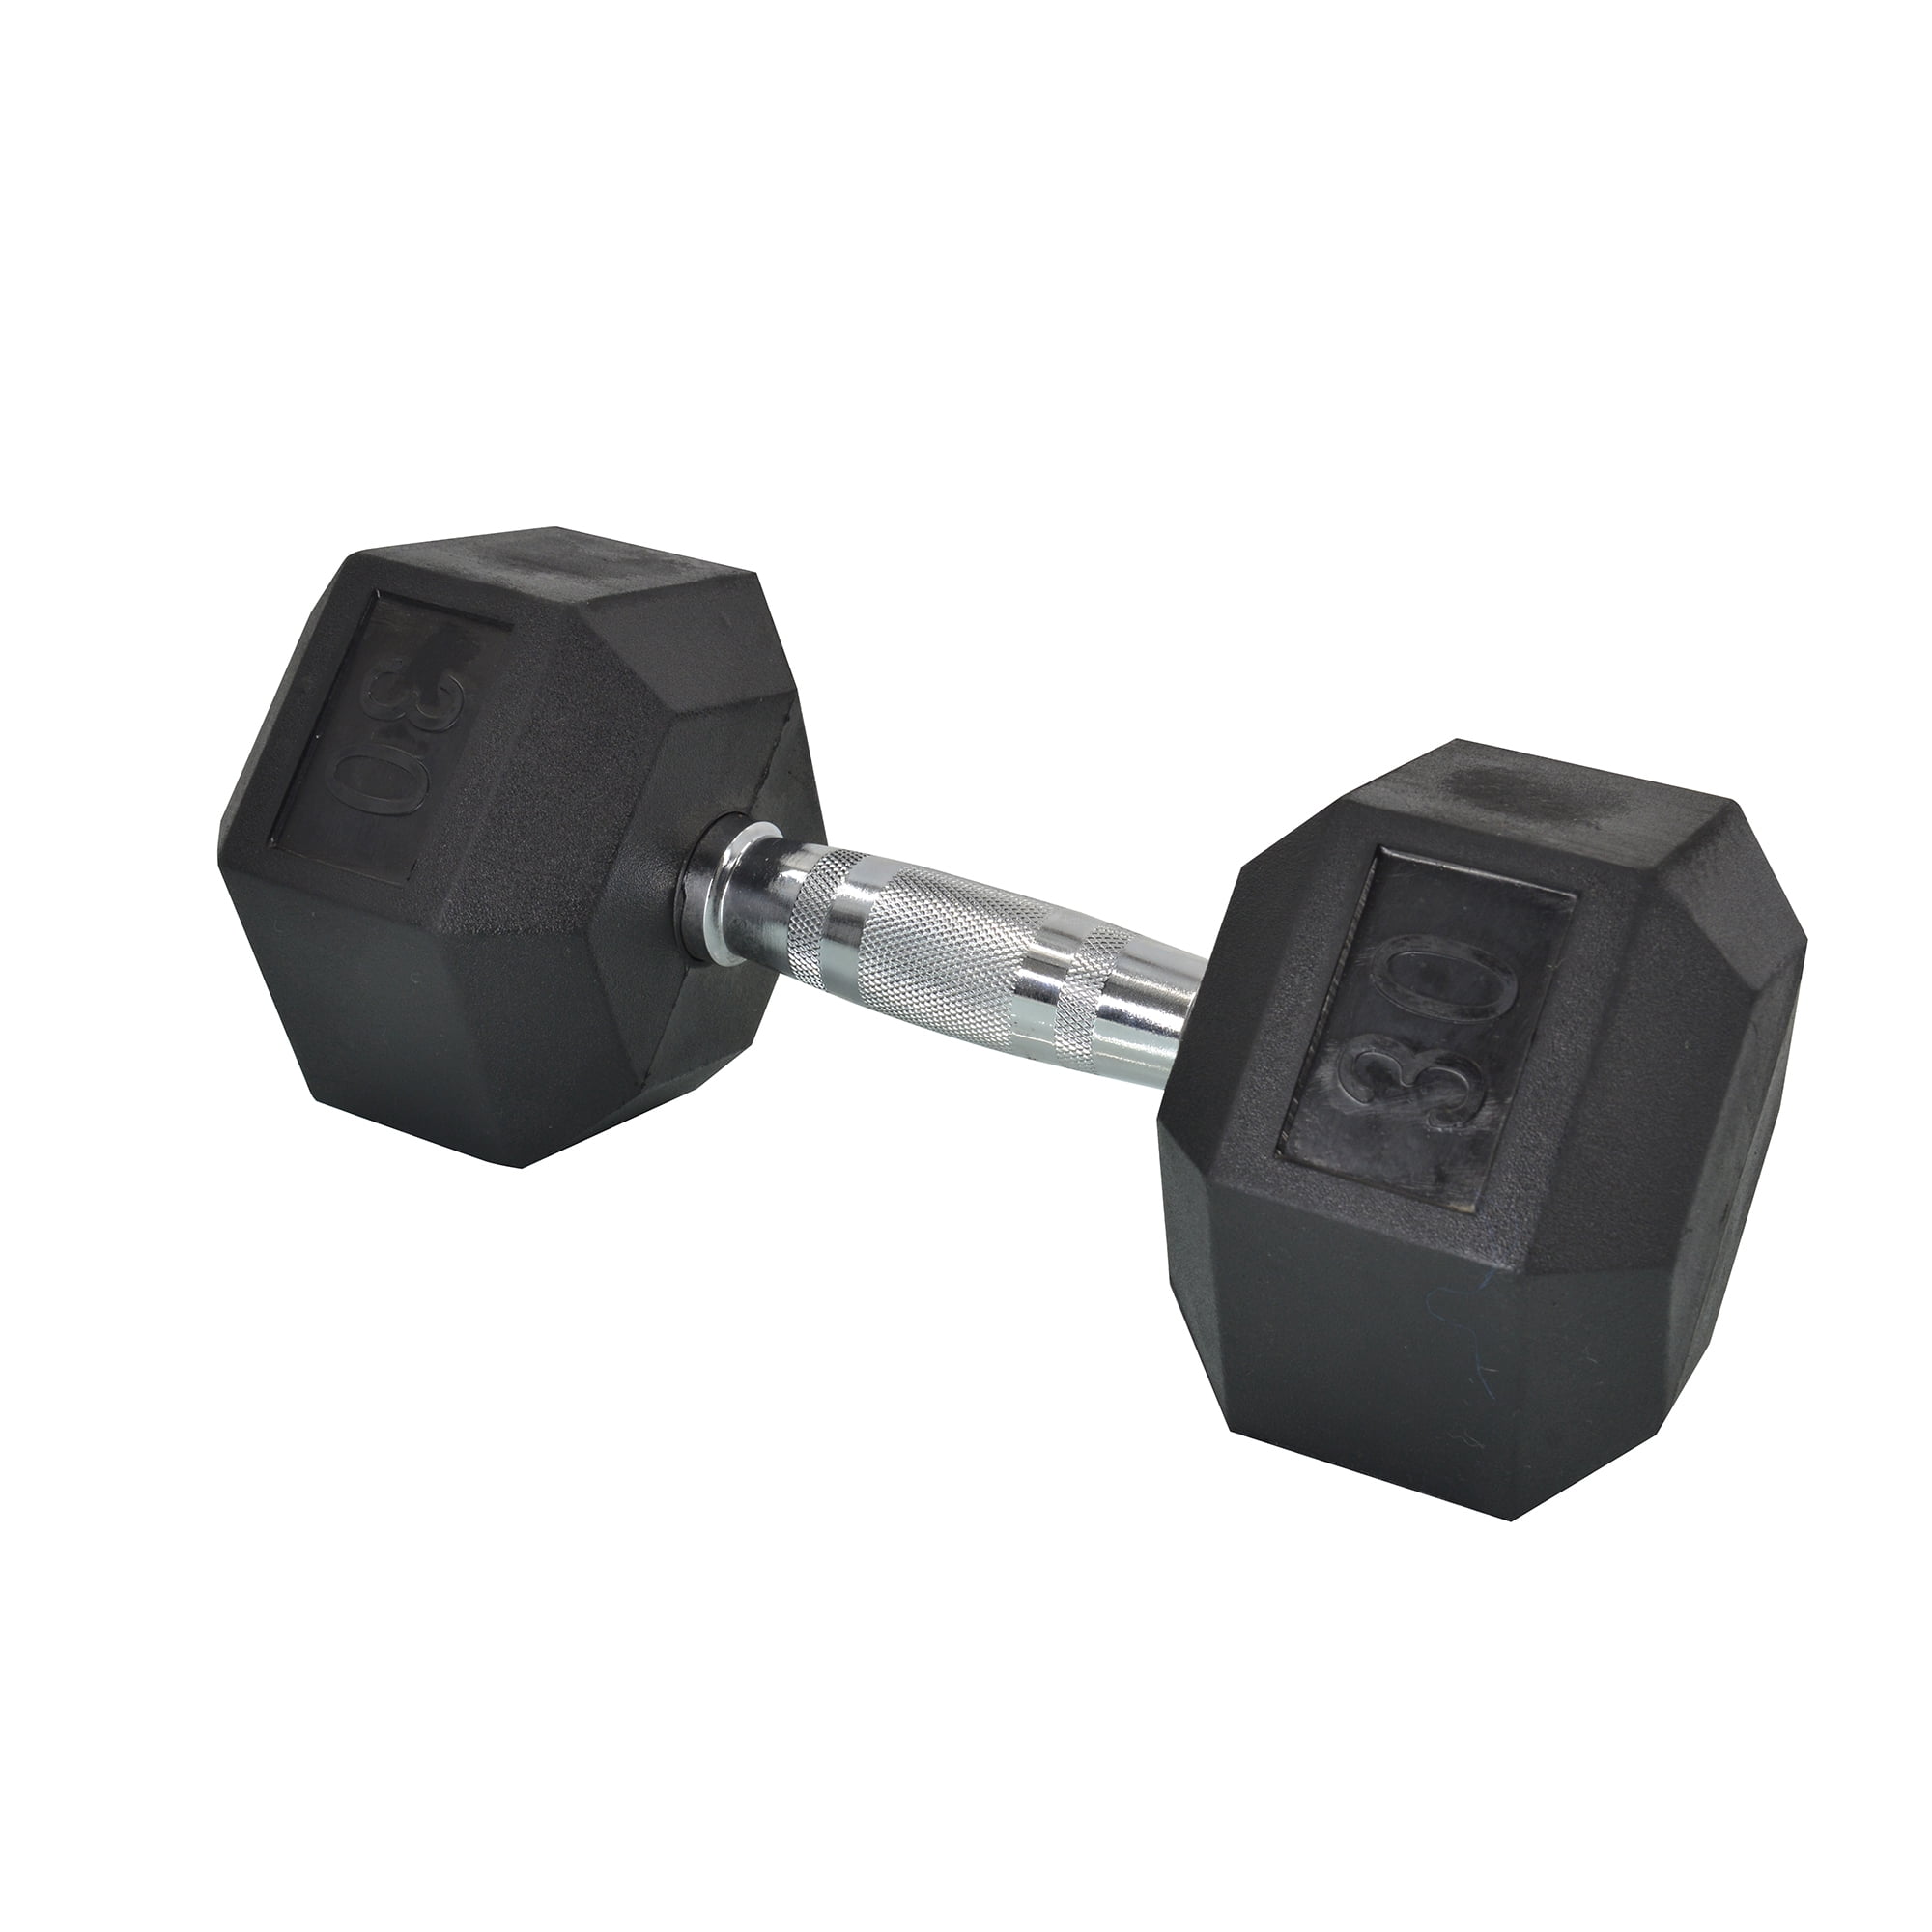 20 30 35 LB Sets FREE SHIP 25 Weider Rubber Hex Dumbbell Weights CHOOSE 15 